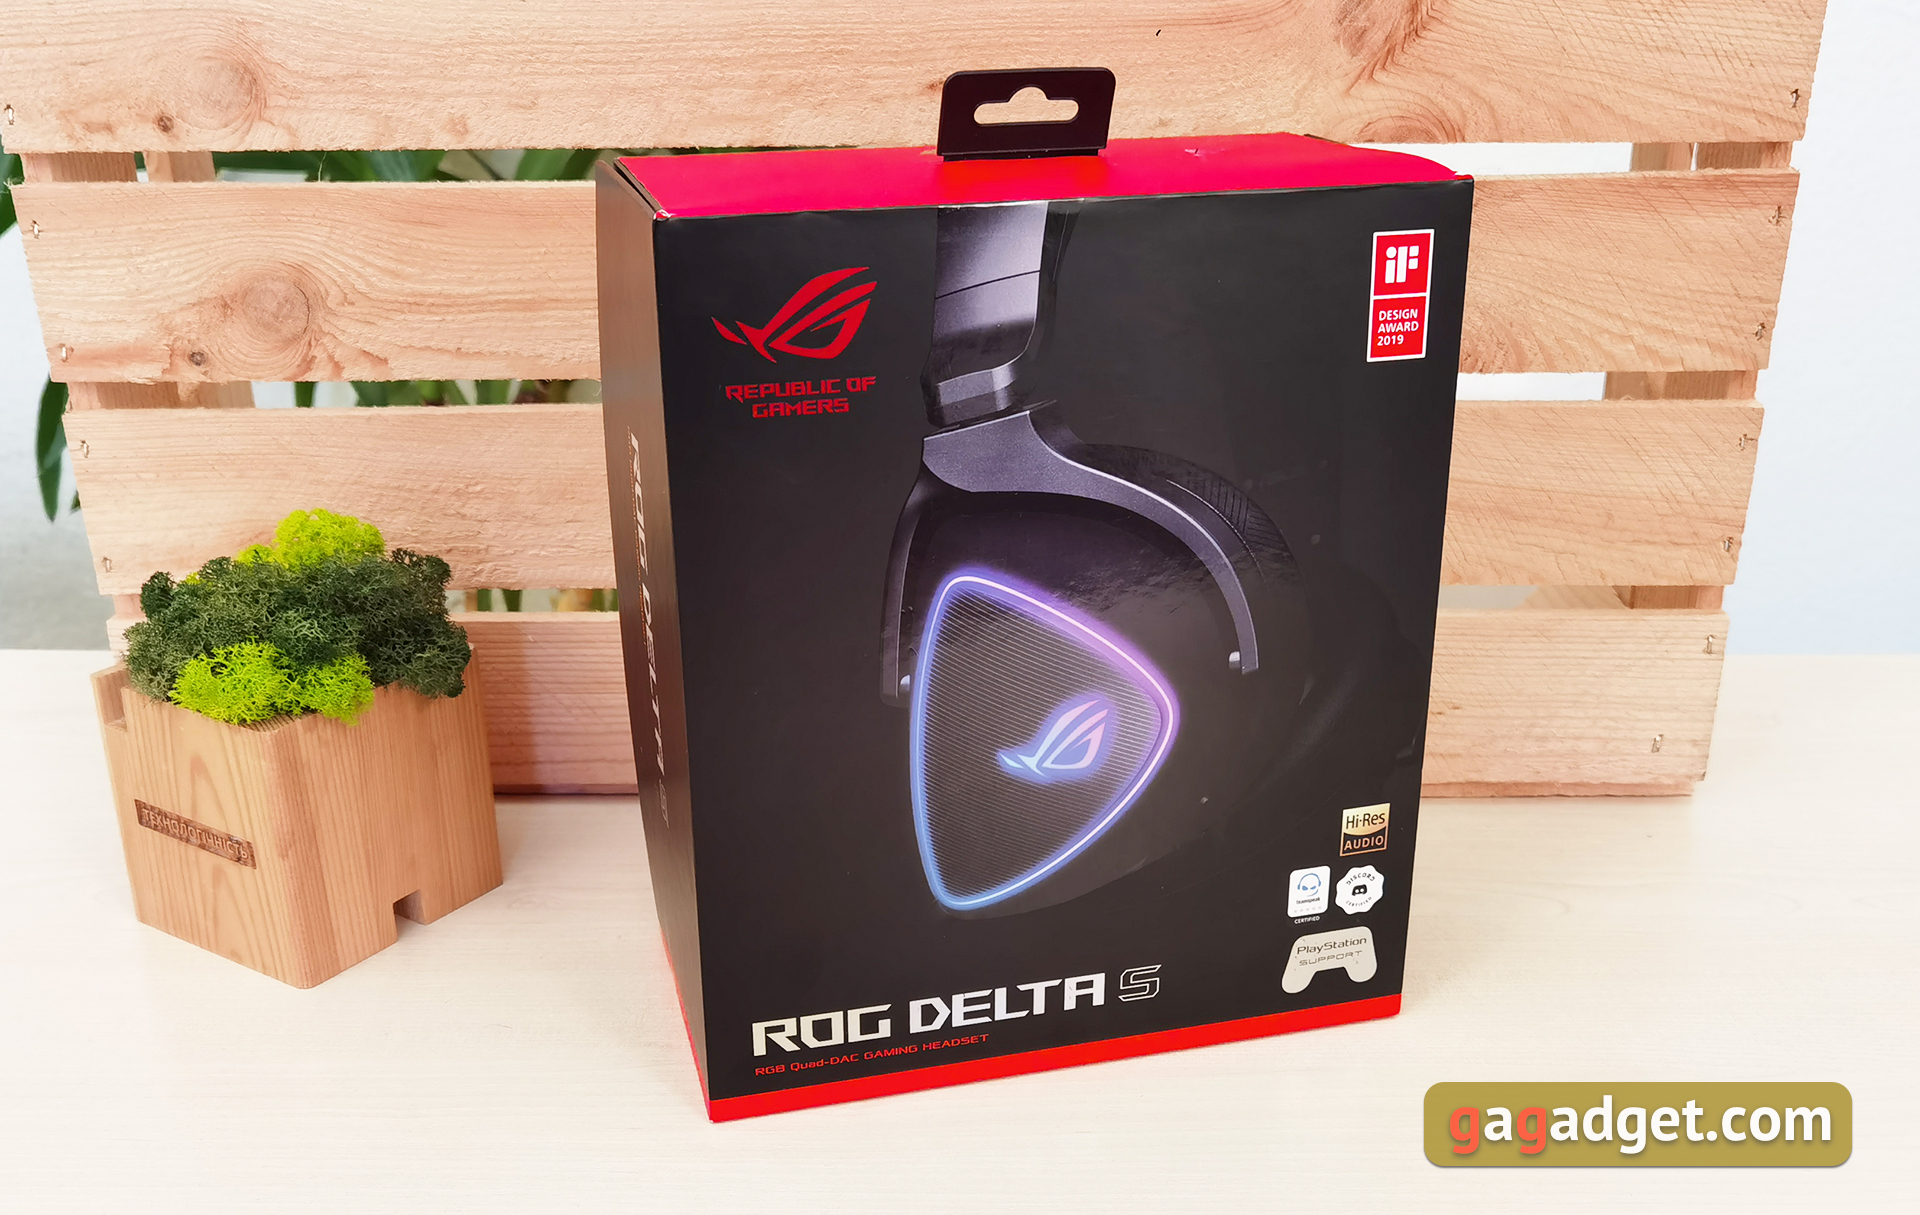 Asus ROG Delta S review: High-quality sound and RGB lighting